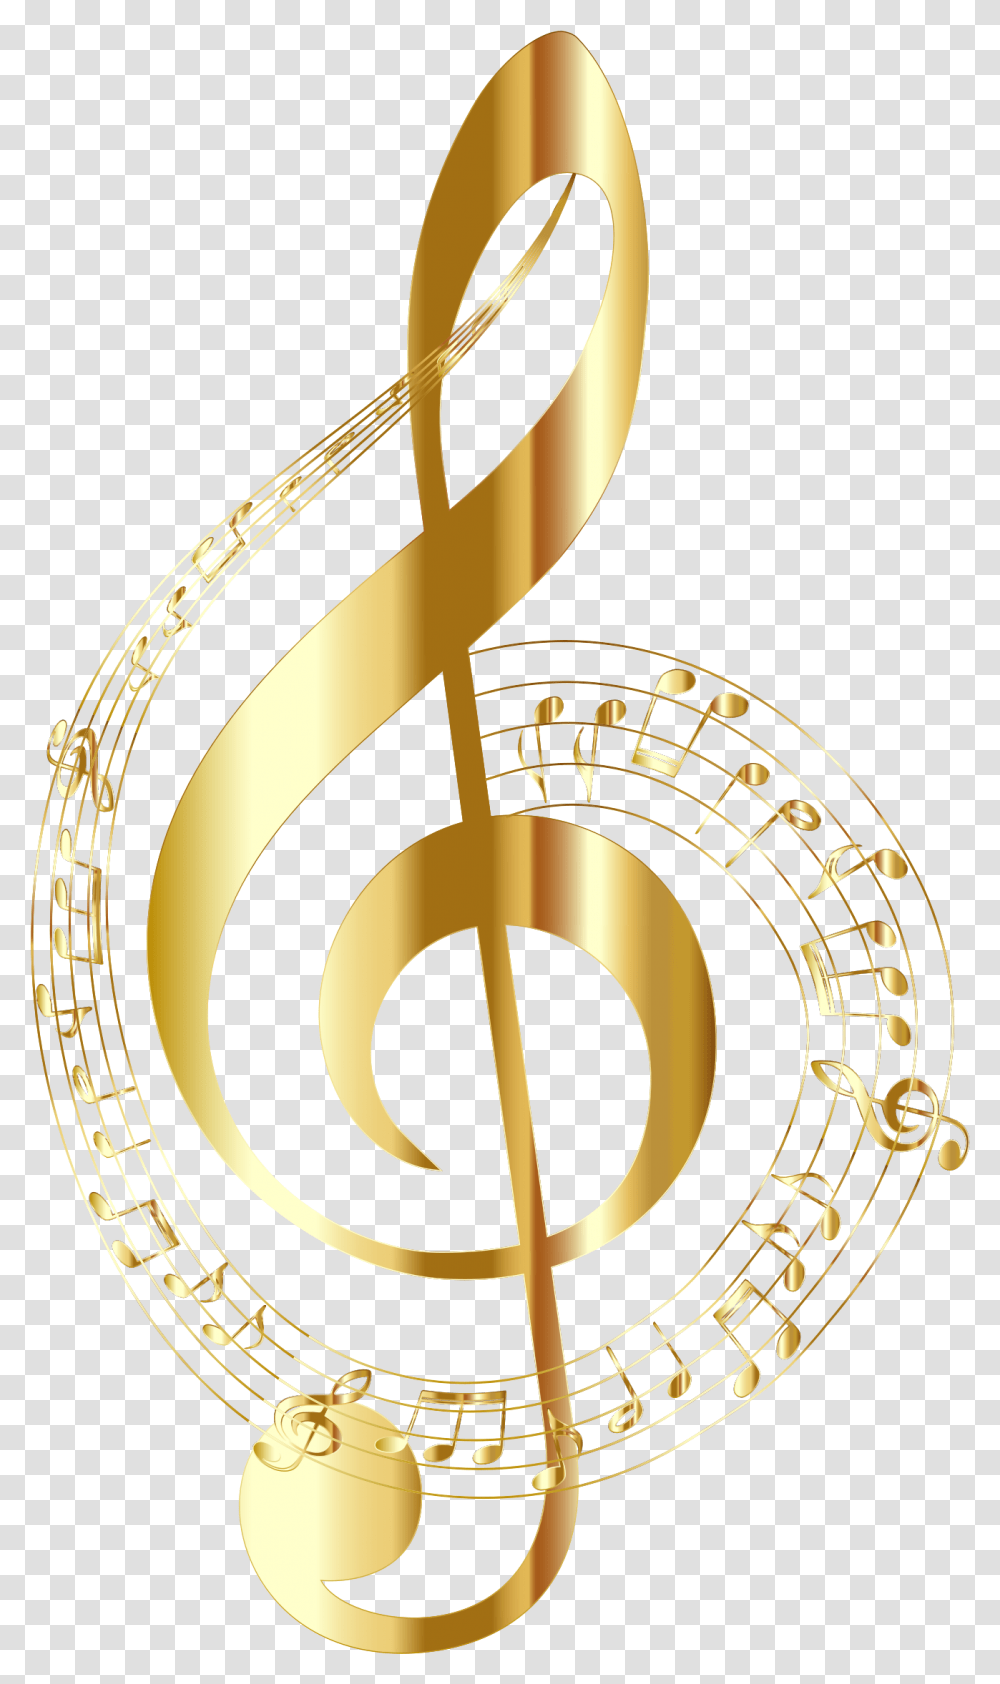 Big Image Gold Music Notes Background Full Gold Music Notes Background, Sundial, Mandolin Transparent Png